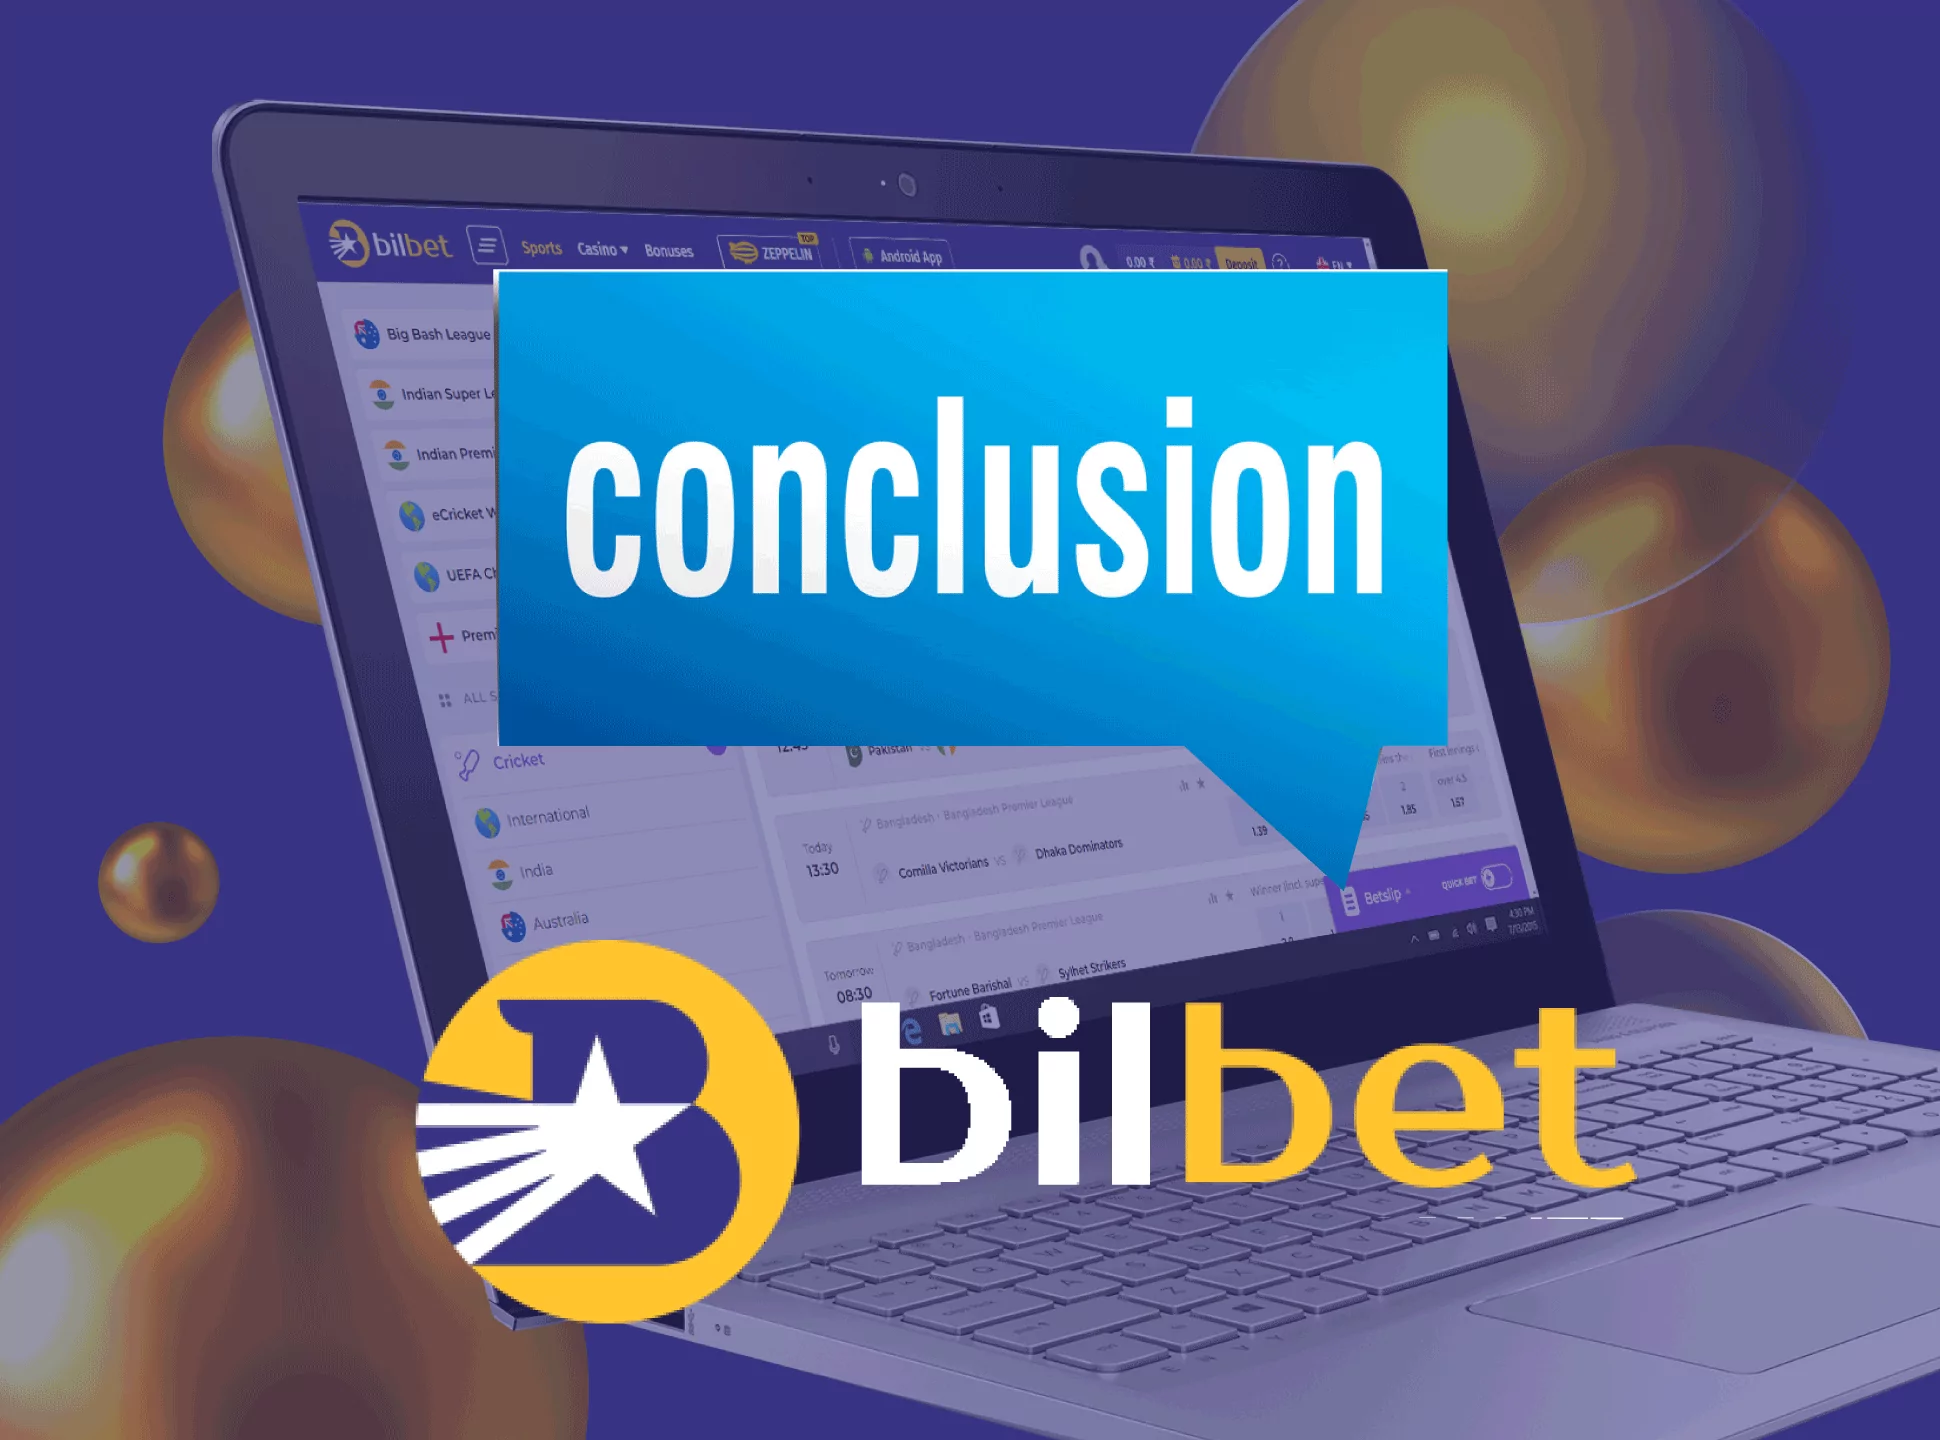 Bilibet is one of the greatest betting companies to bet or play online casino games in India.